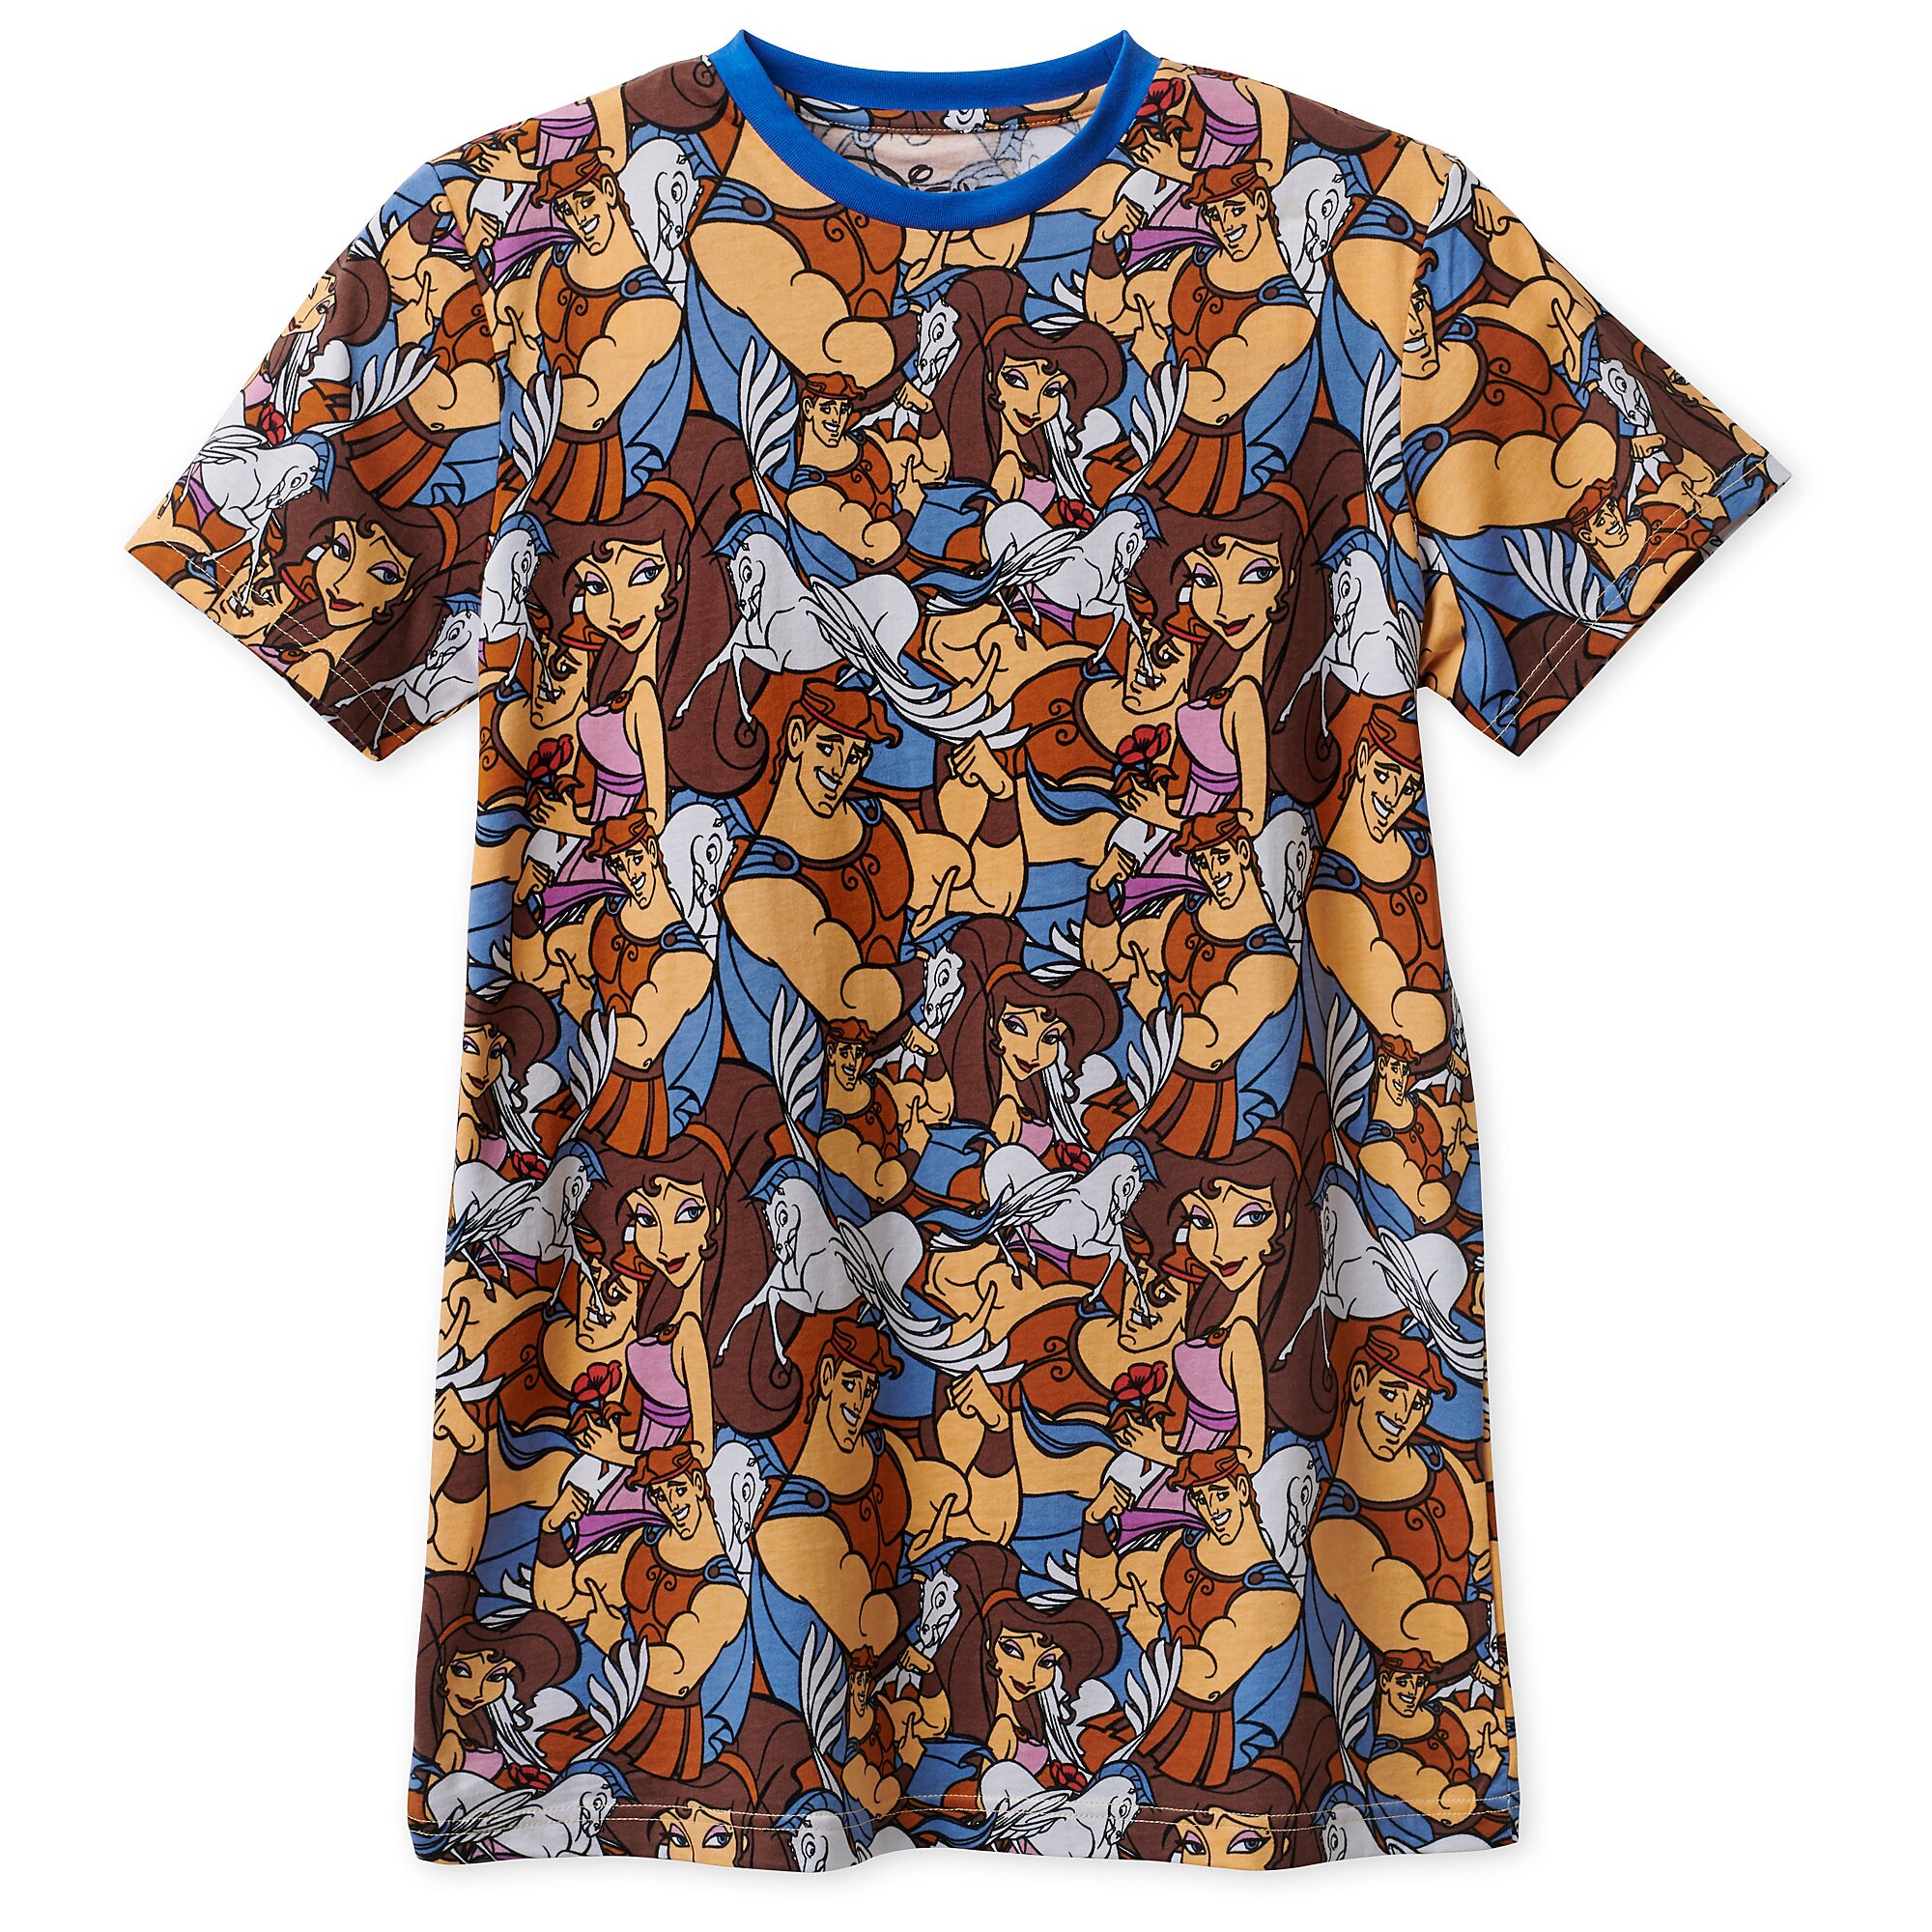 Hercules T-Shirt for Adults by Cakeworthy